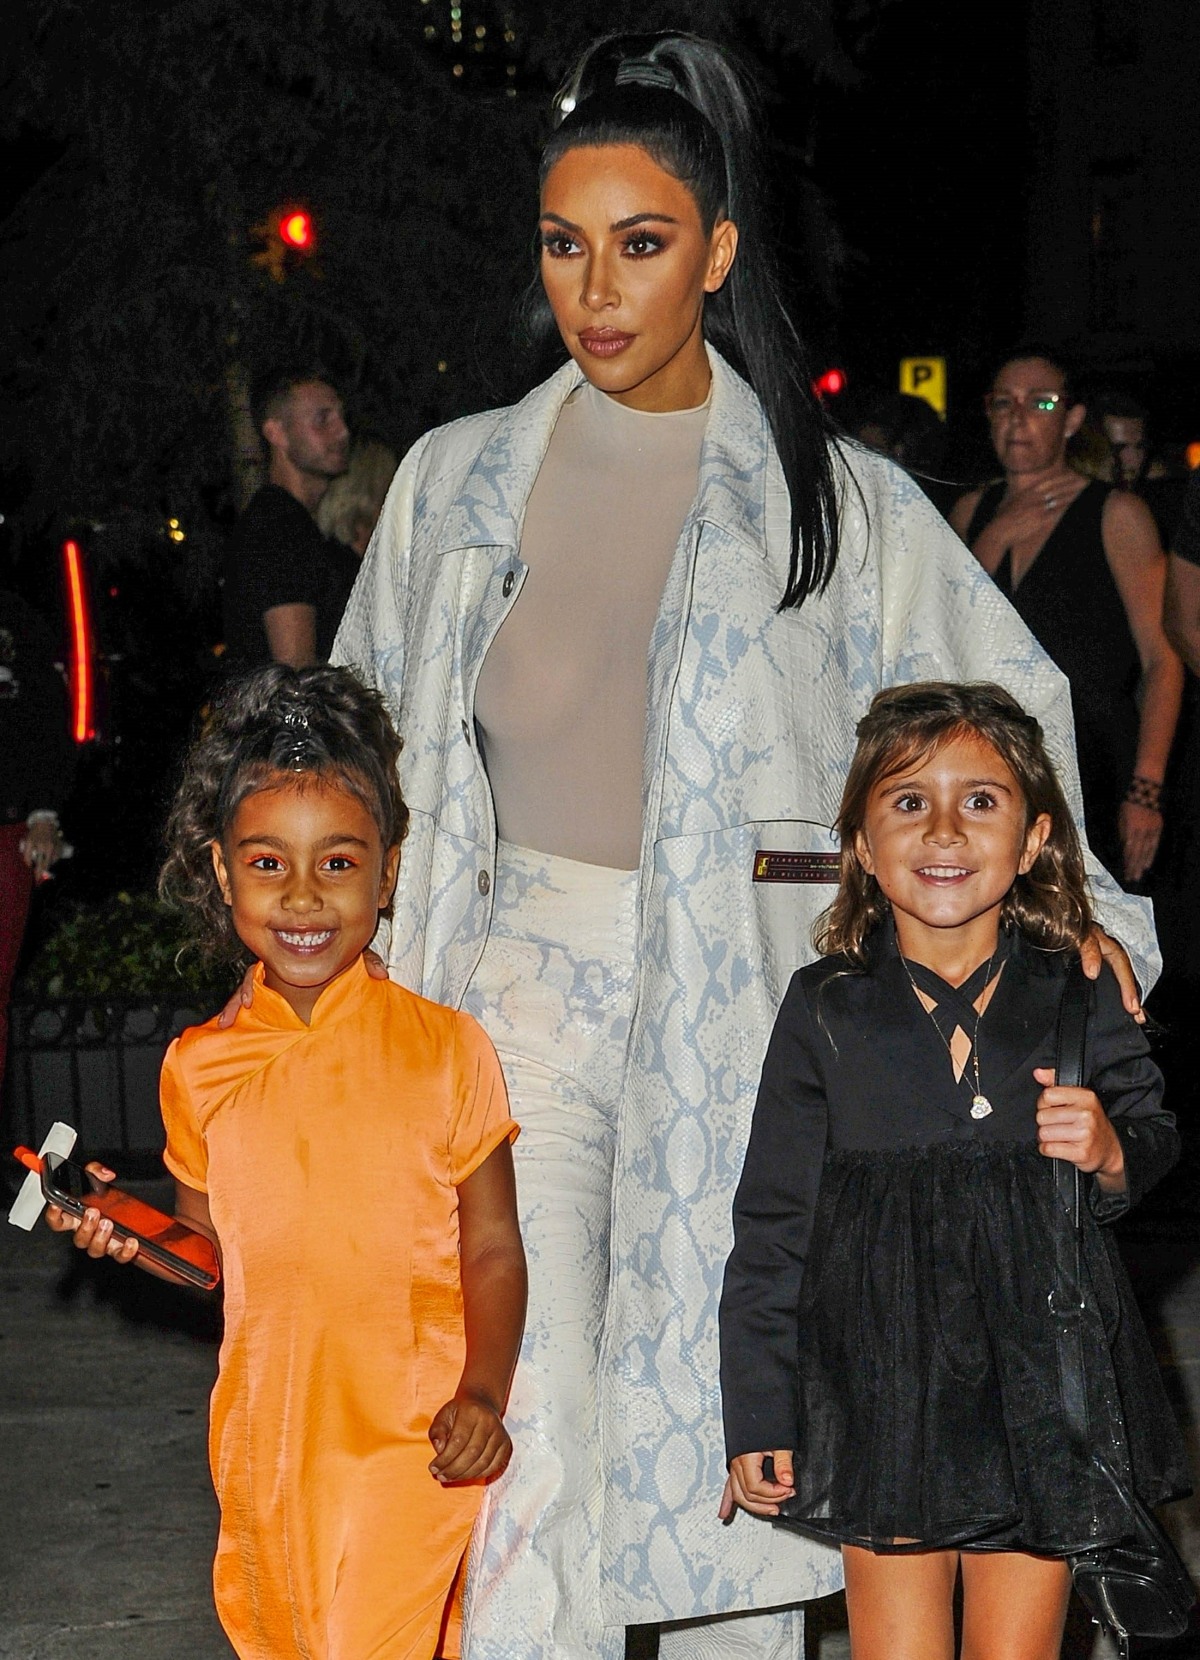 Kim Kardashian and North have a big smile as they leave Cipriani Downtown